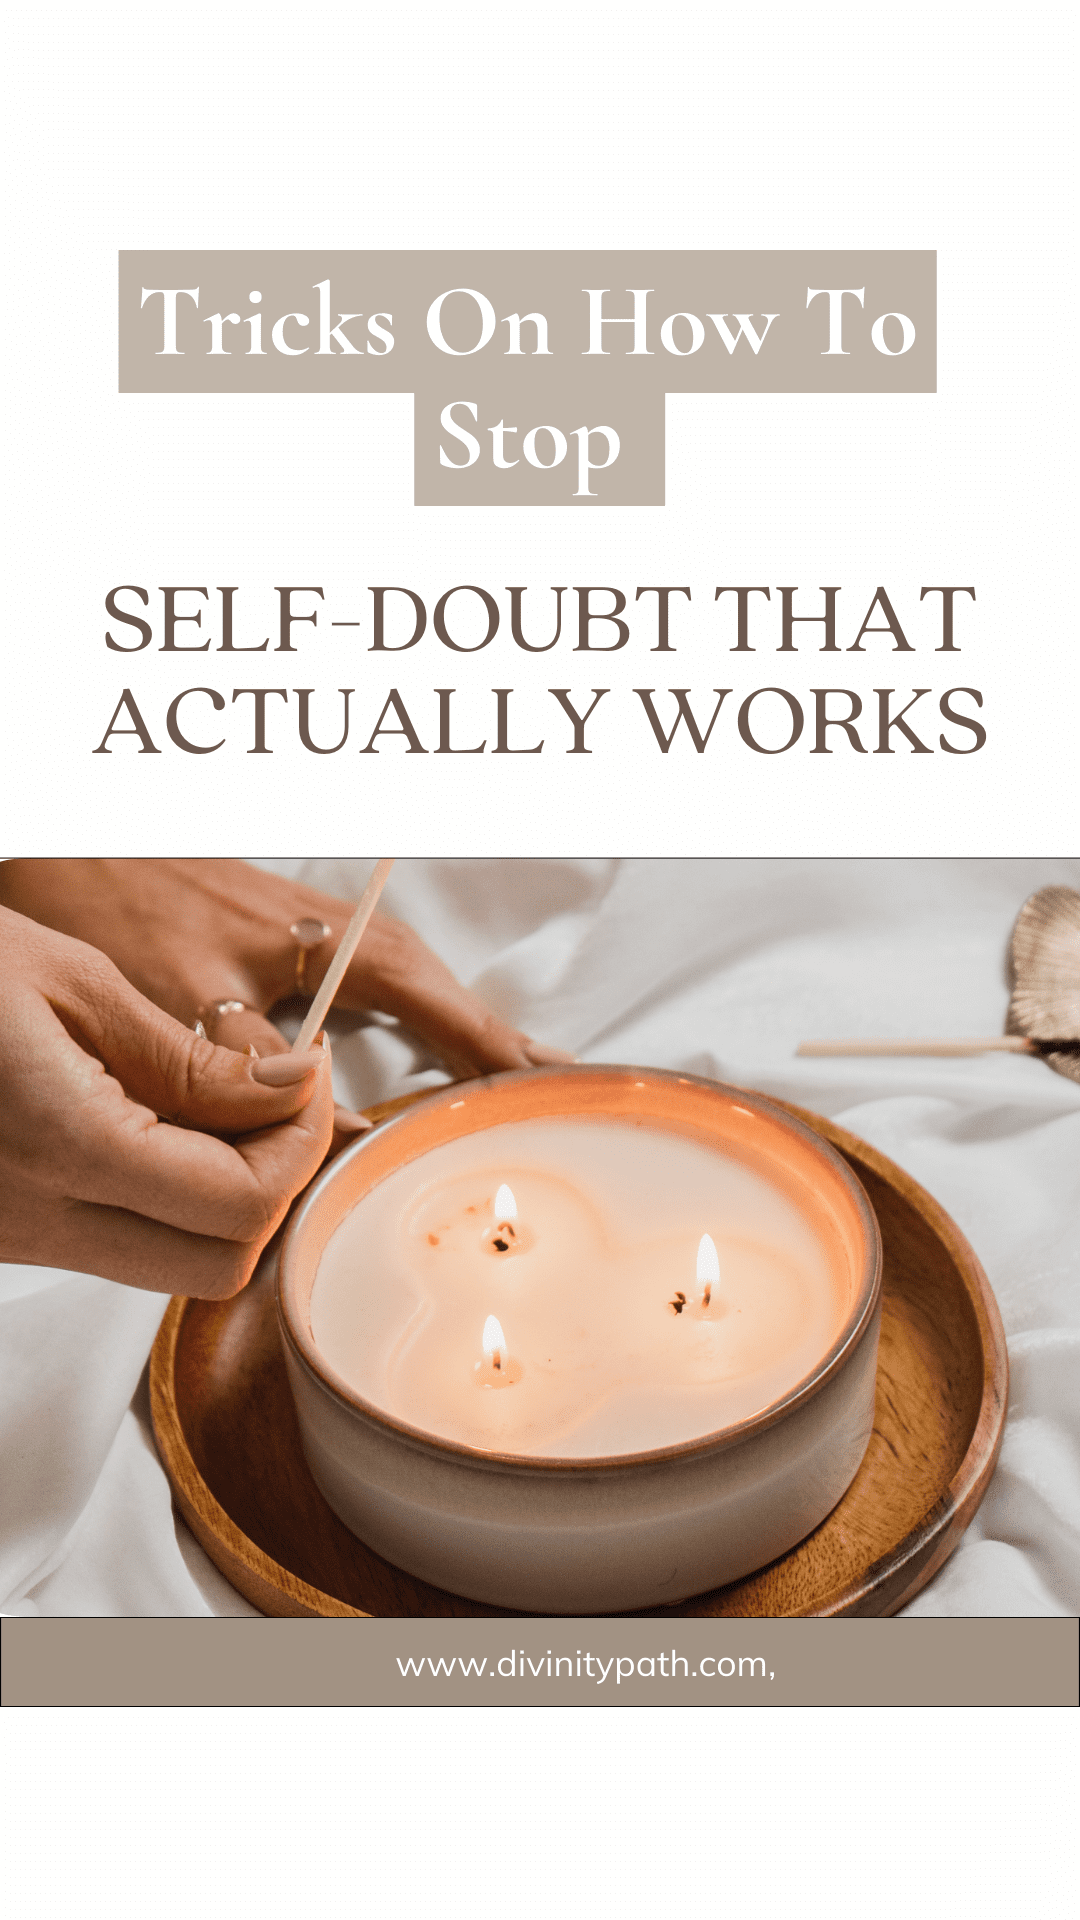 How To Stop Self-doubt That Actually Works